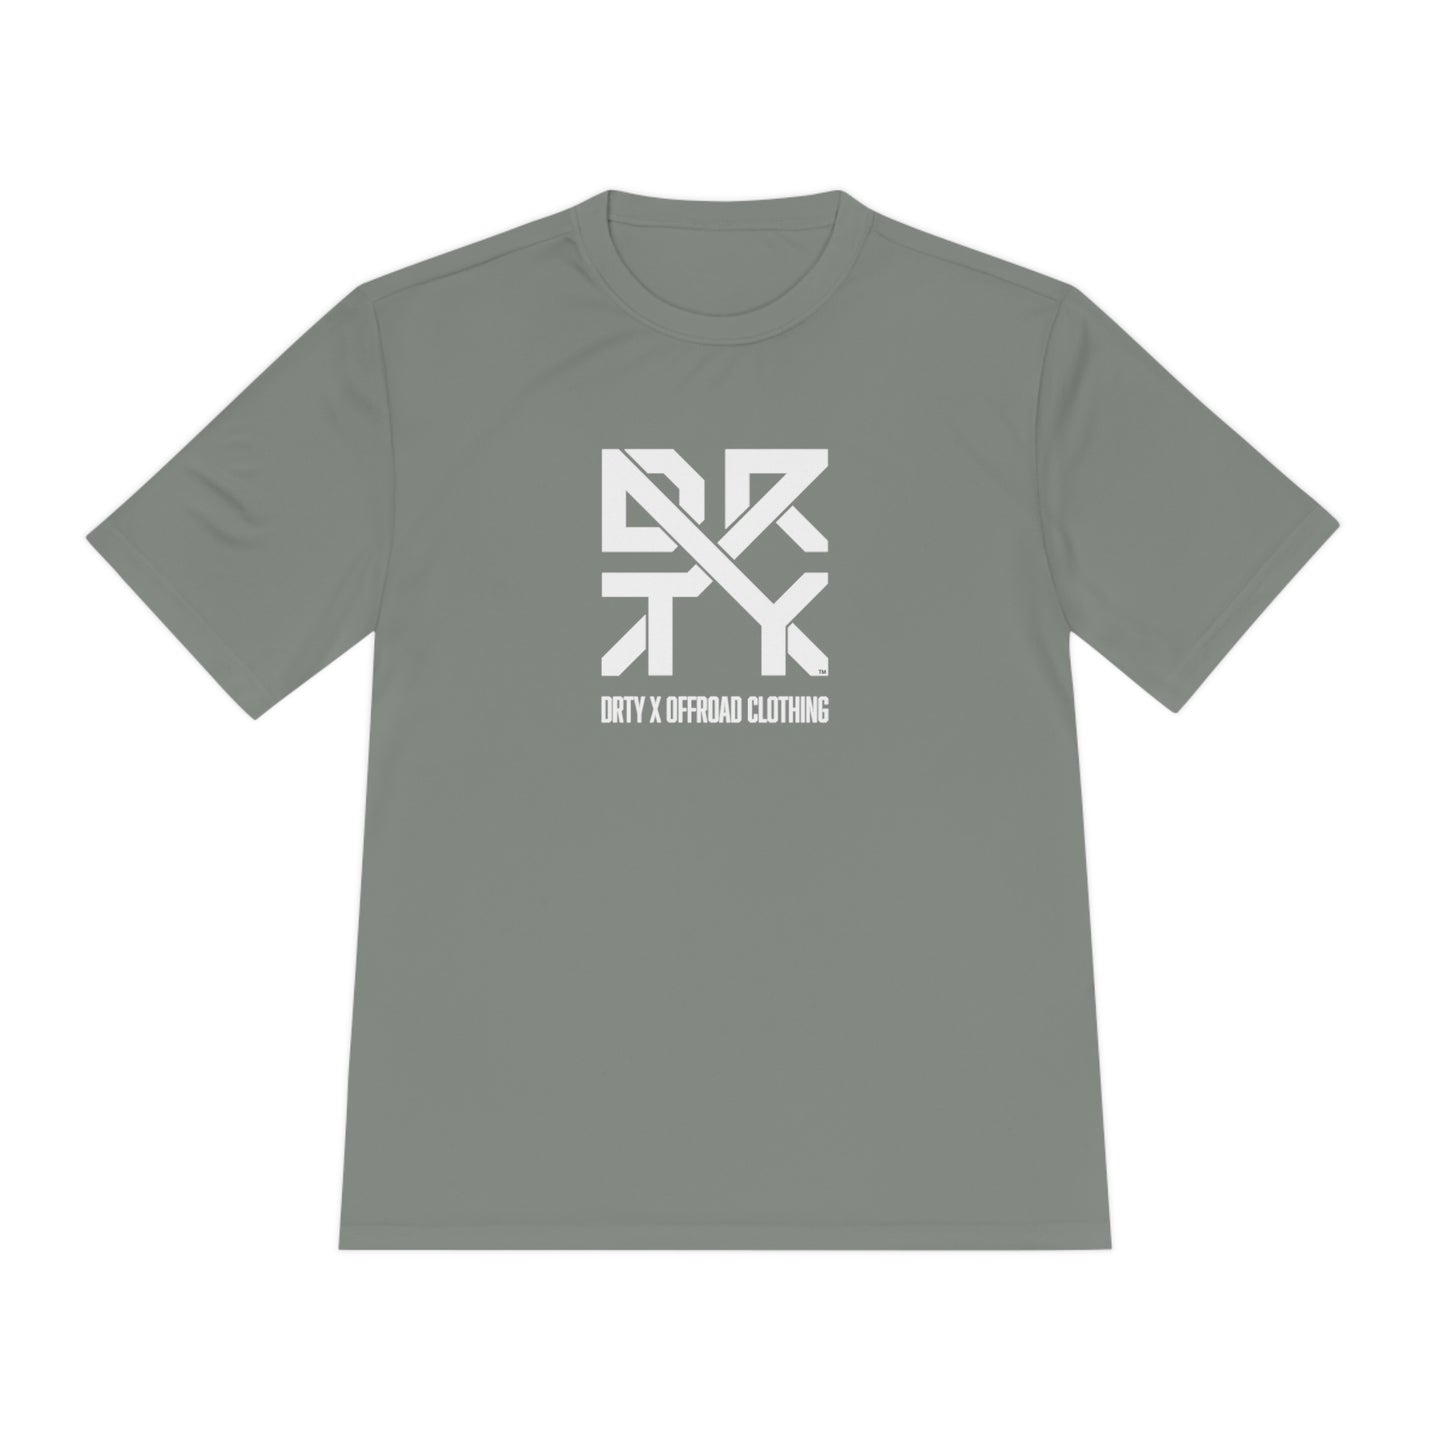 This image showcases the front view of a T-shirt with a large DRTY X Logo on the center of the shirt.